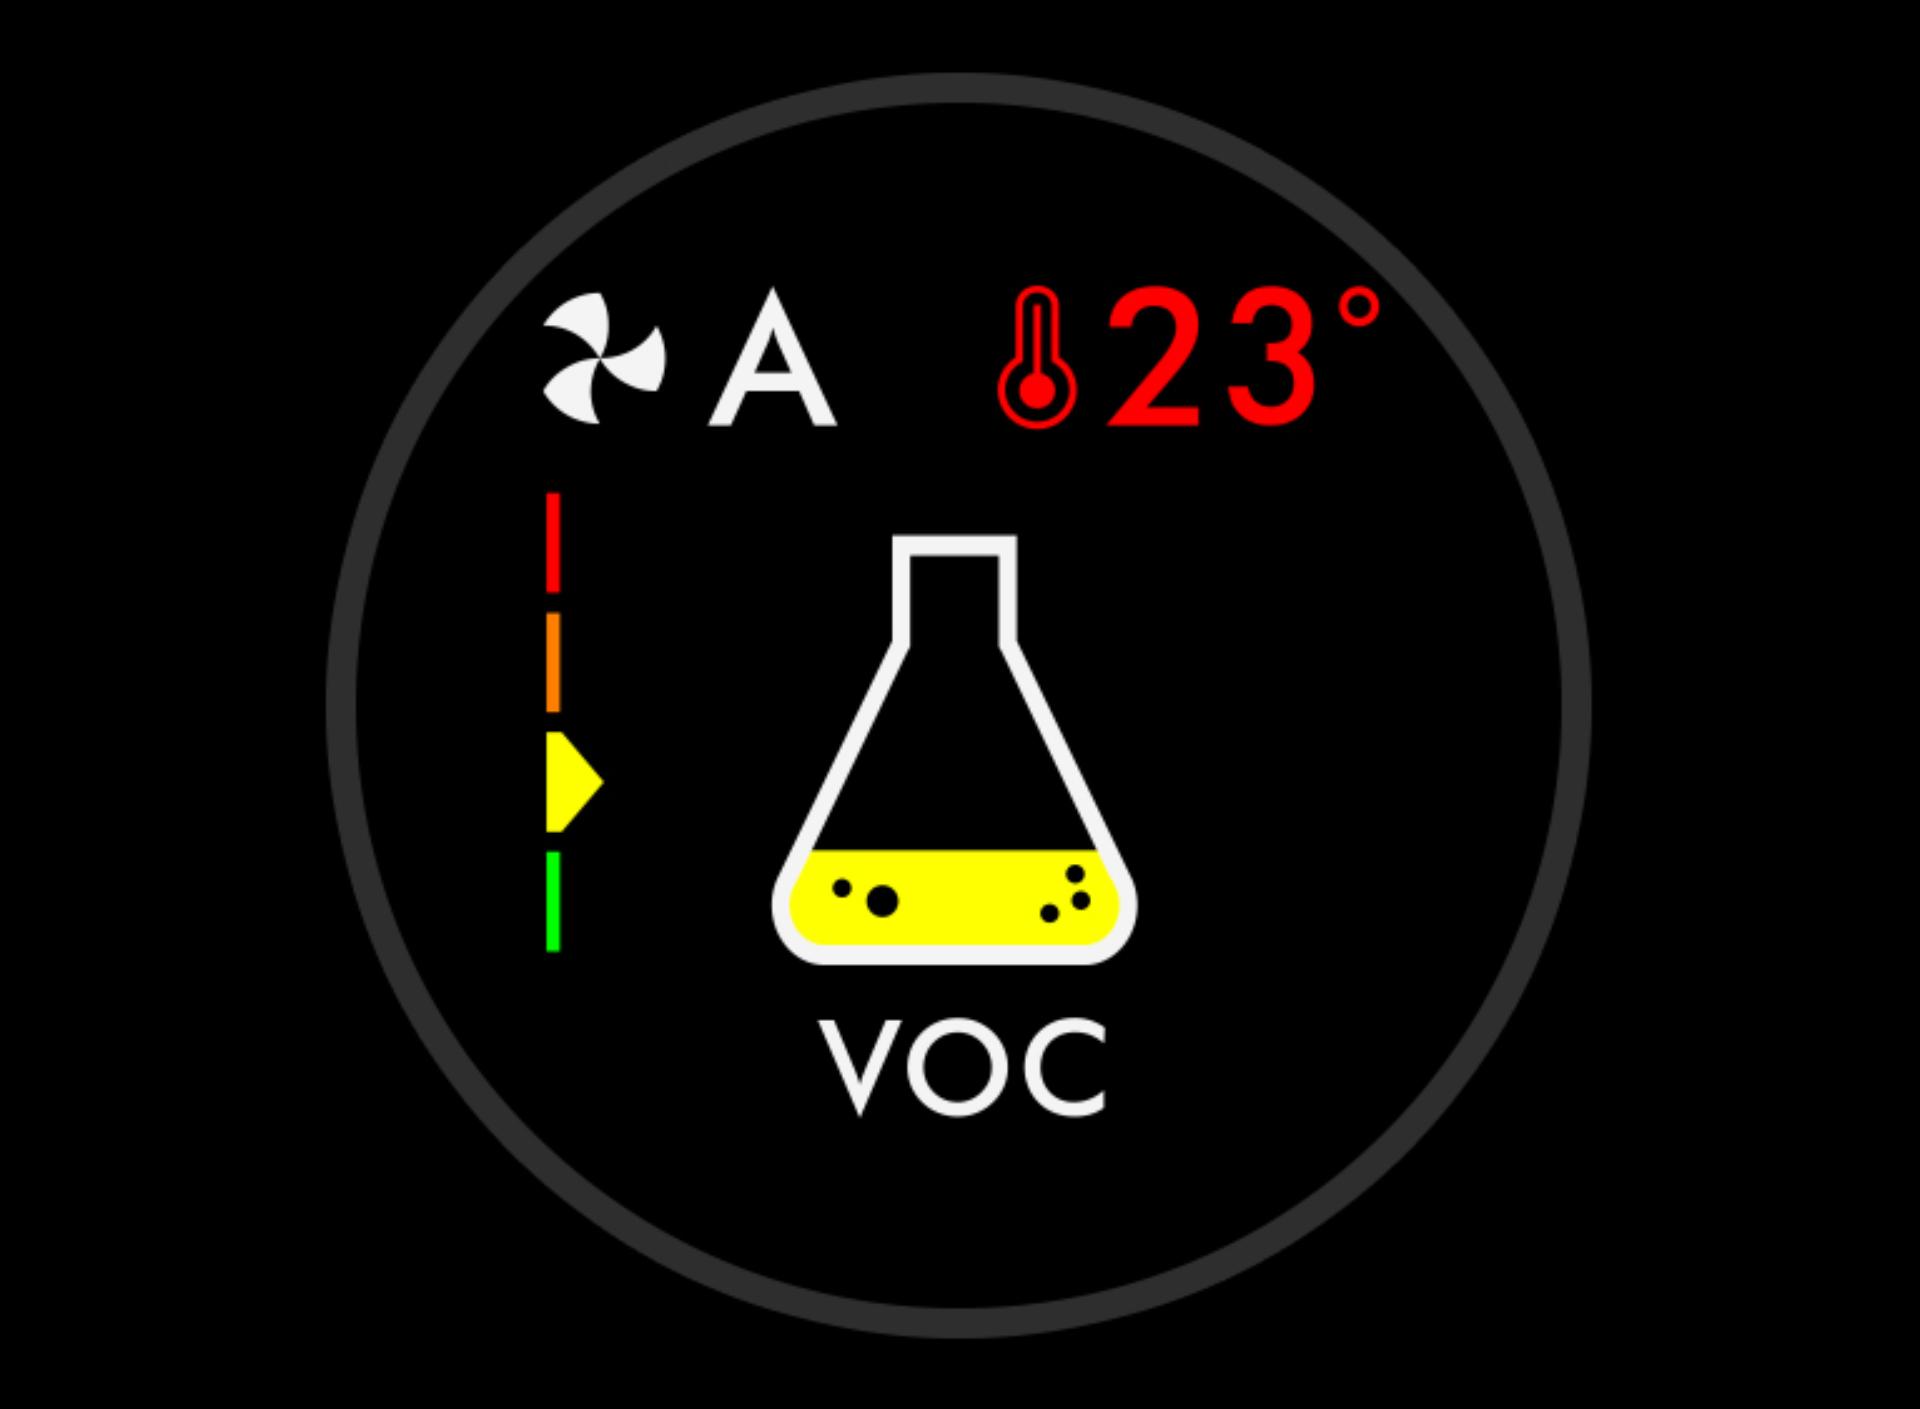 Conical flask with VOC on LCD screen